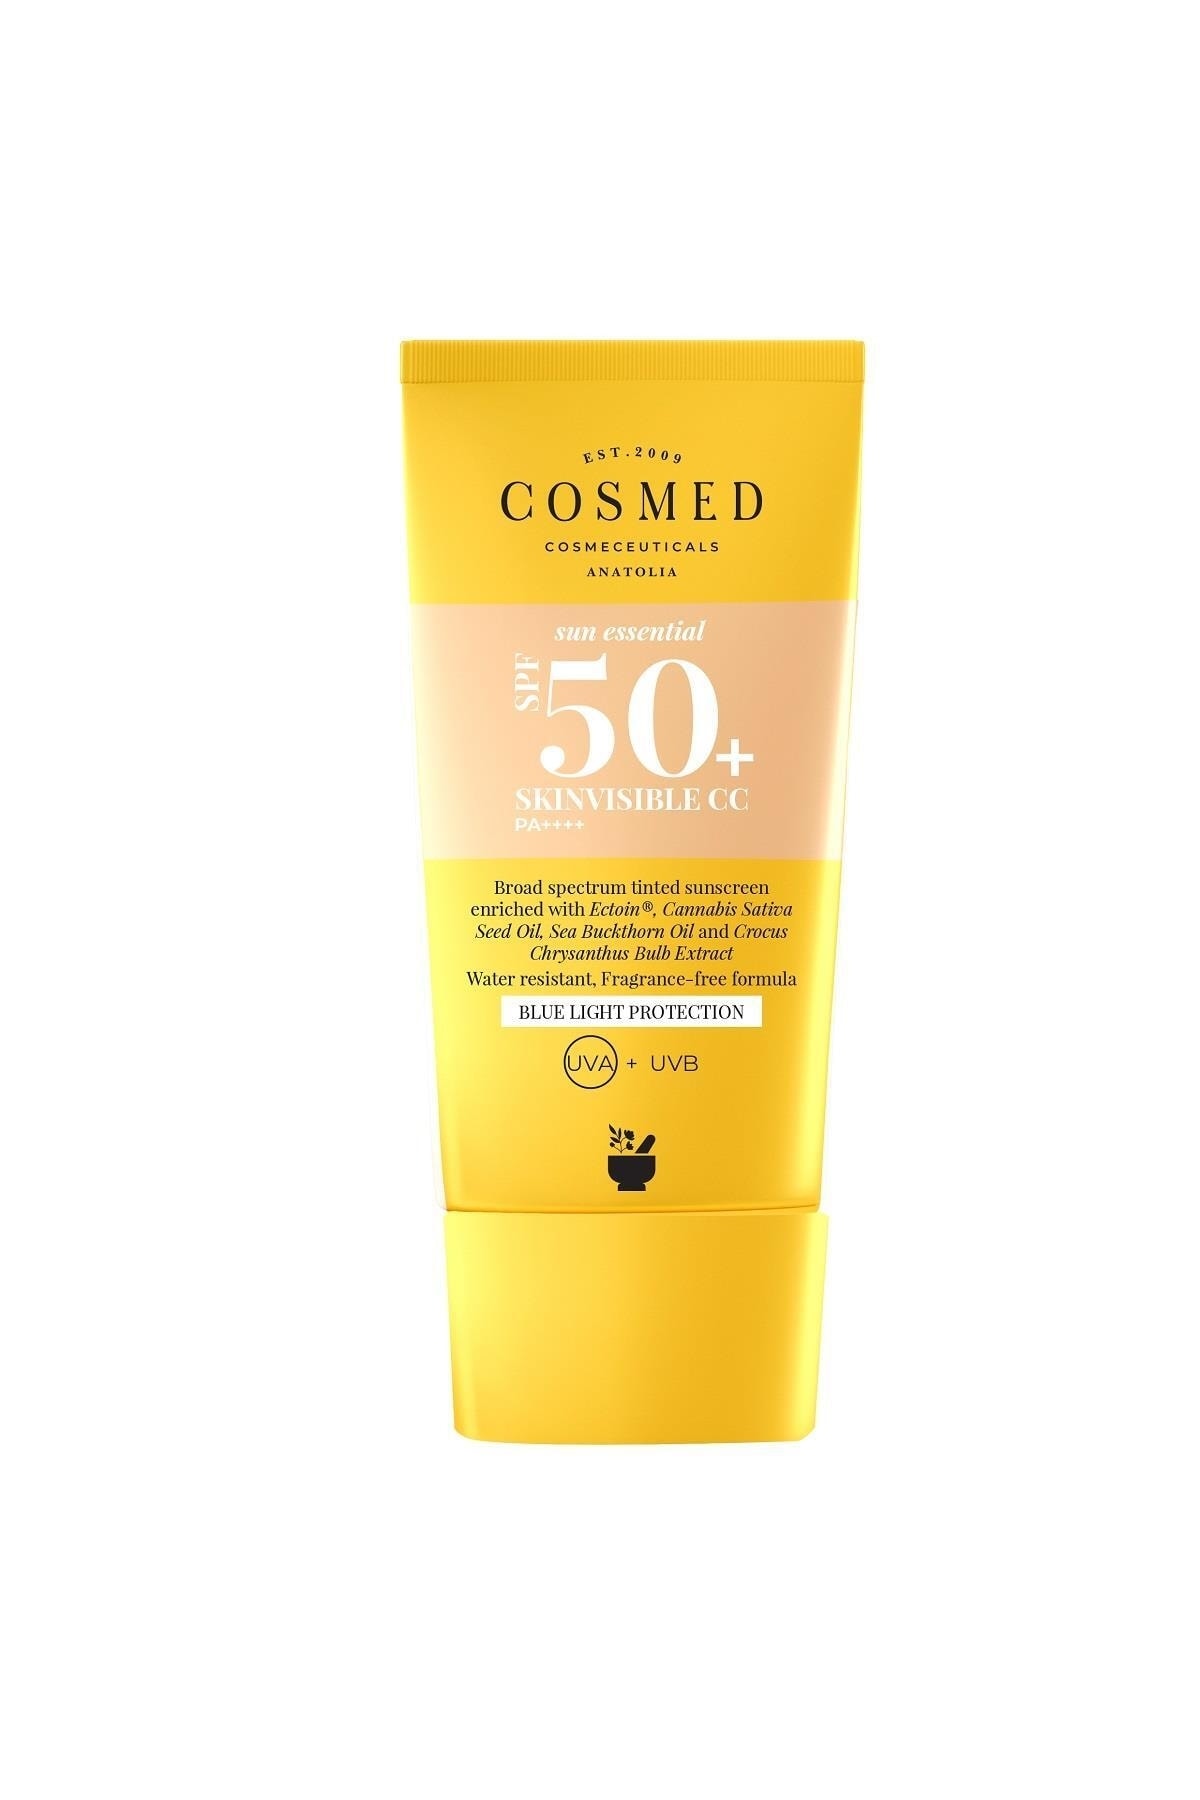 COSMED Sun Essential - Skinvisible Cc Spf 50+ 30 Ml